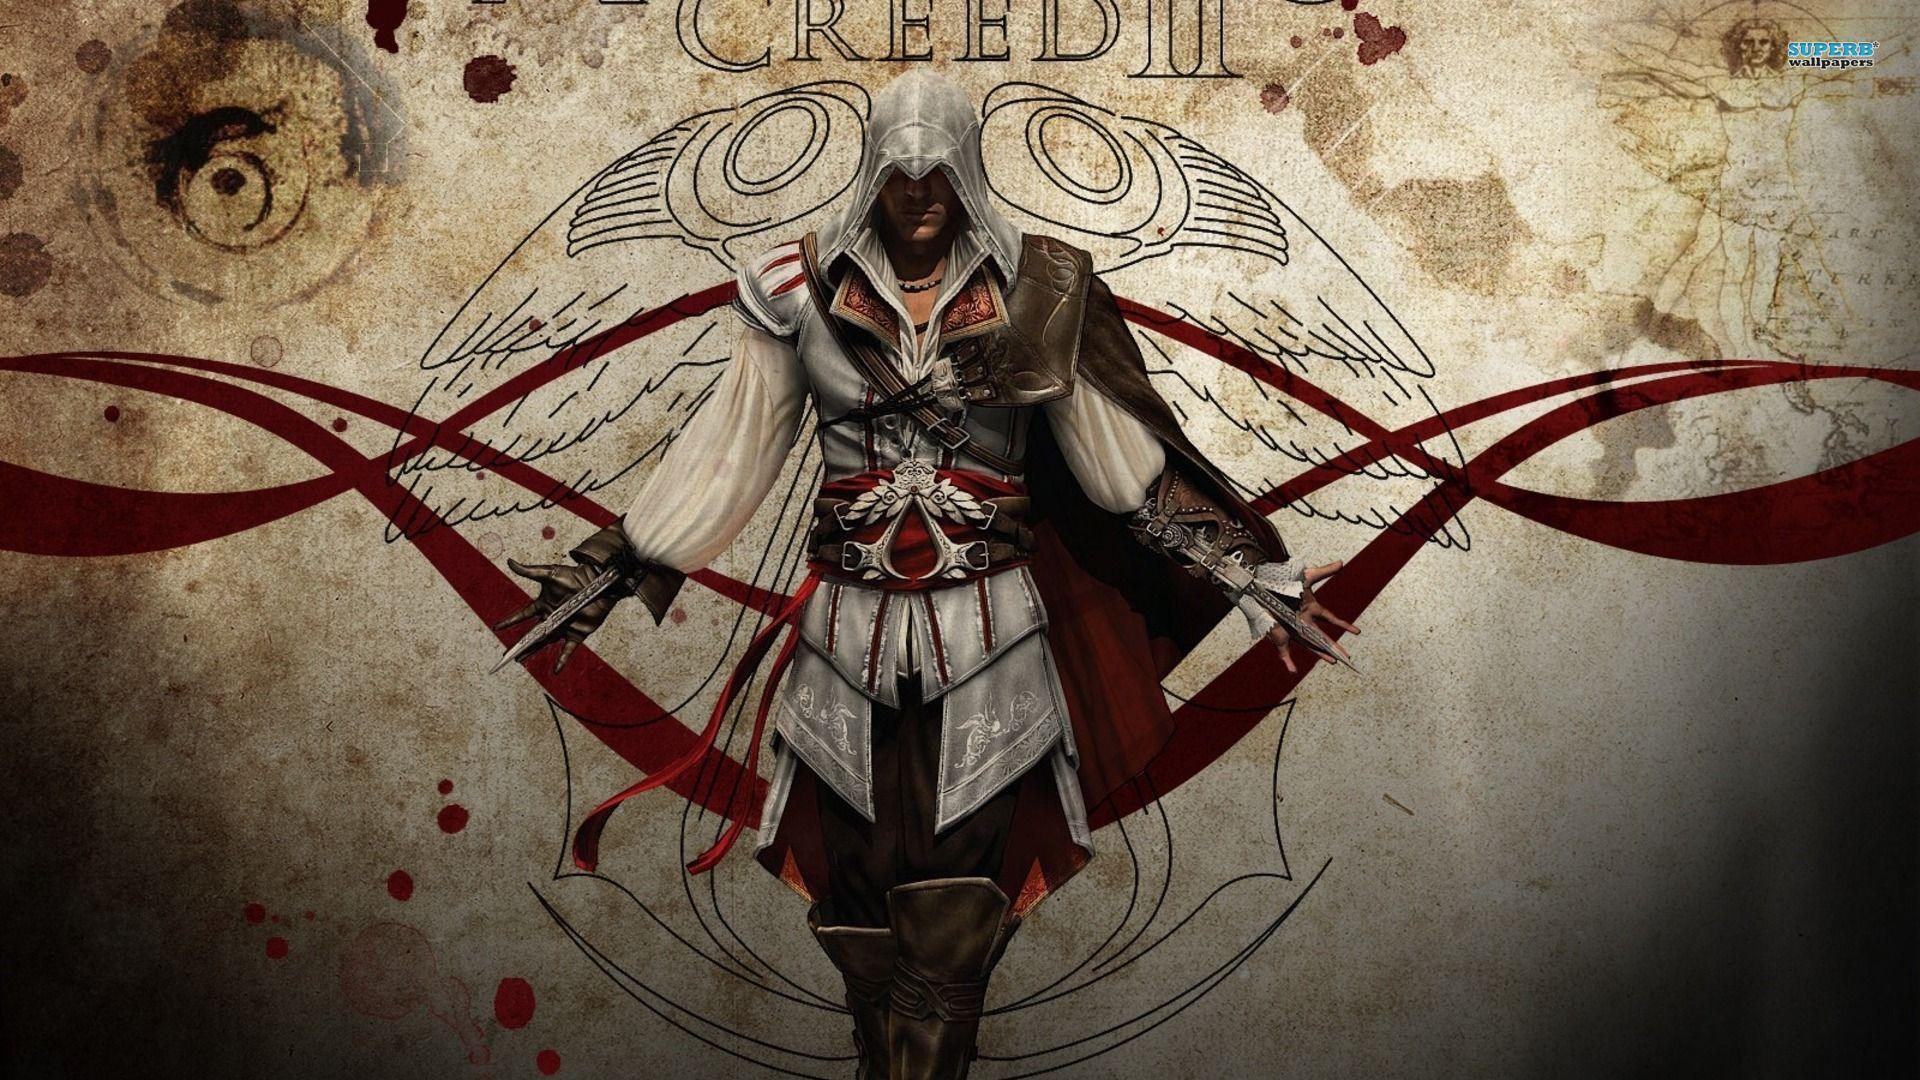 60+ Assassin's Creed II HD Wallpapers and Backgrounds